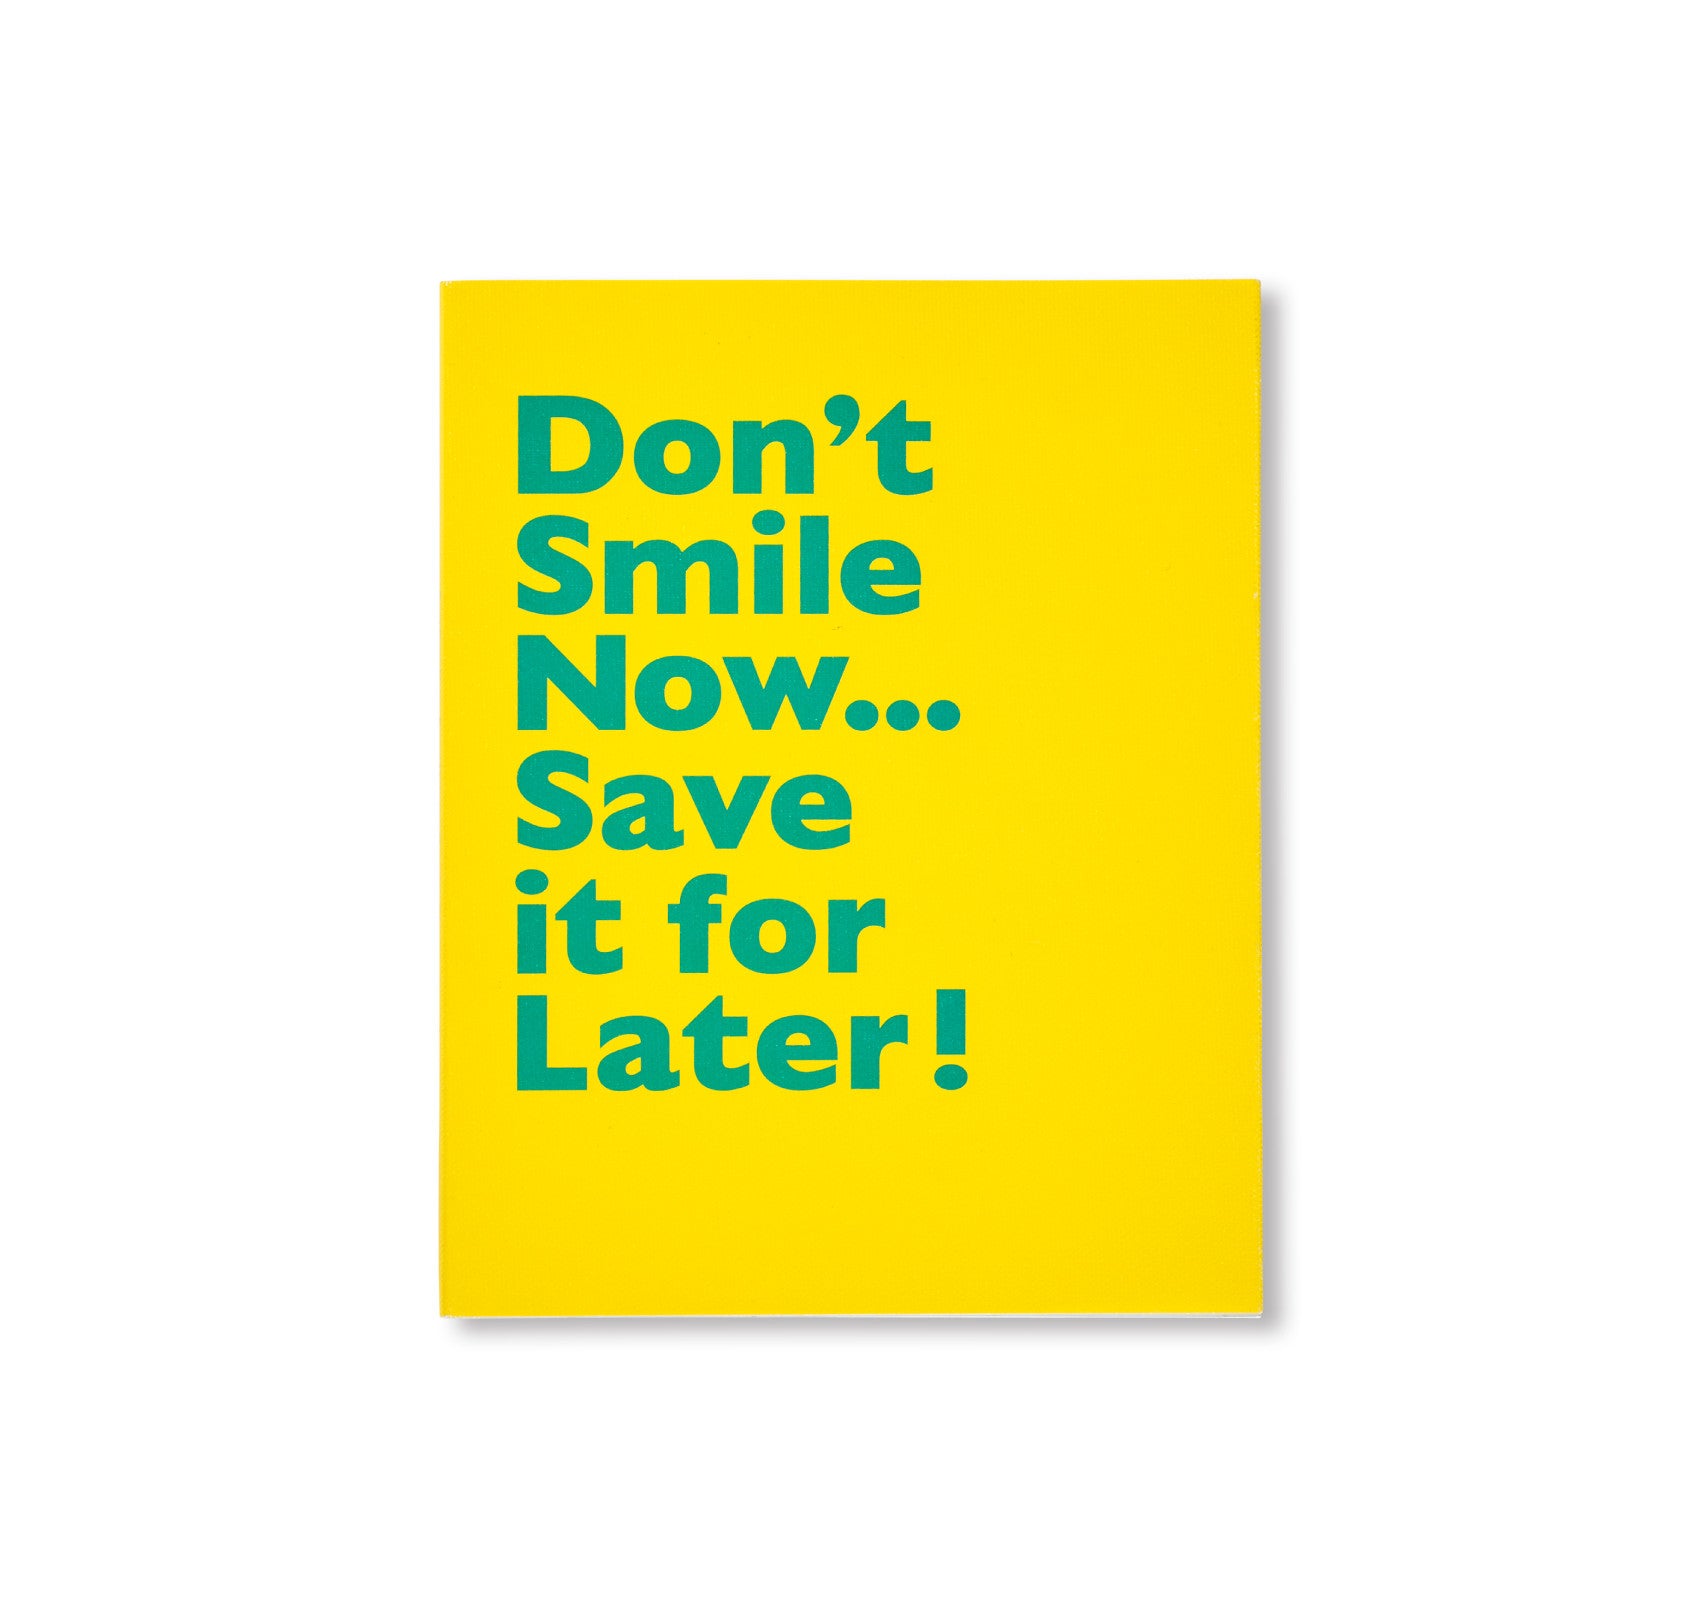 DON'T SMILE NOW ... SAVE IT FOR LATER by Thijs groot Wassink